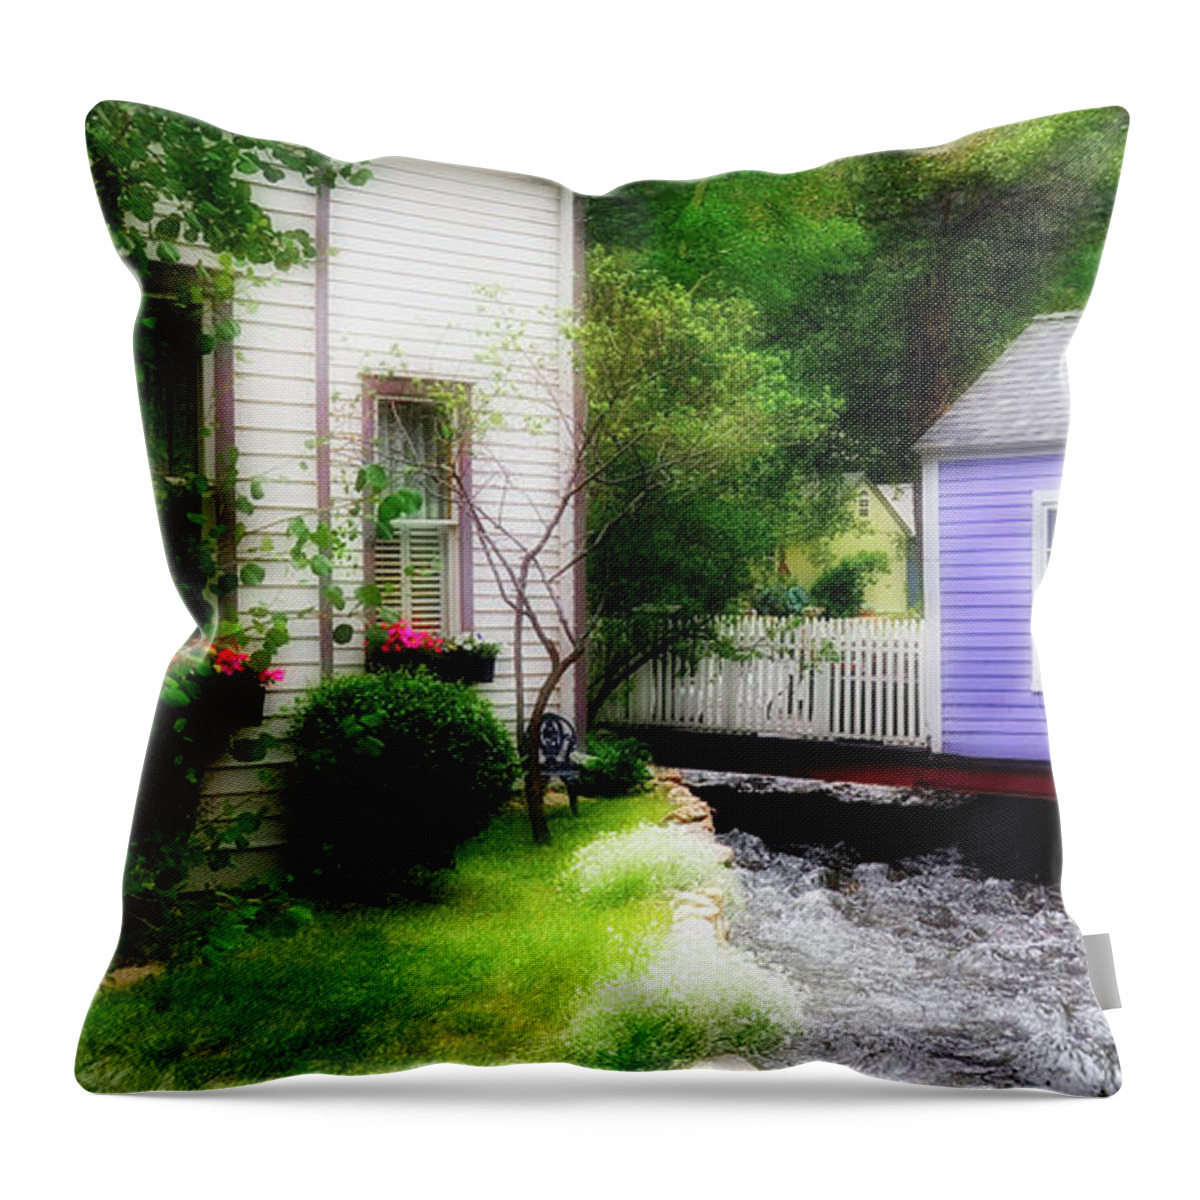 Fine Art Photography Throw Pillow featuring the photograph Charm by John Strong